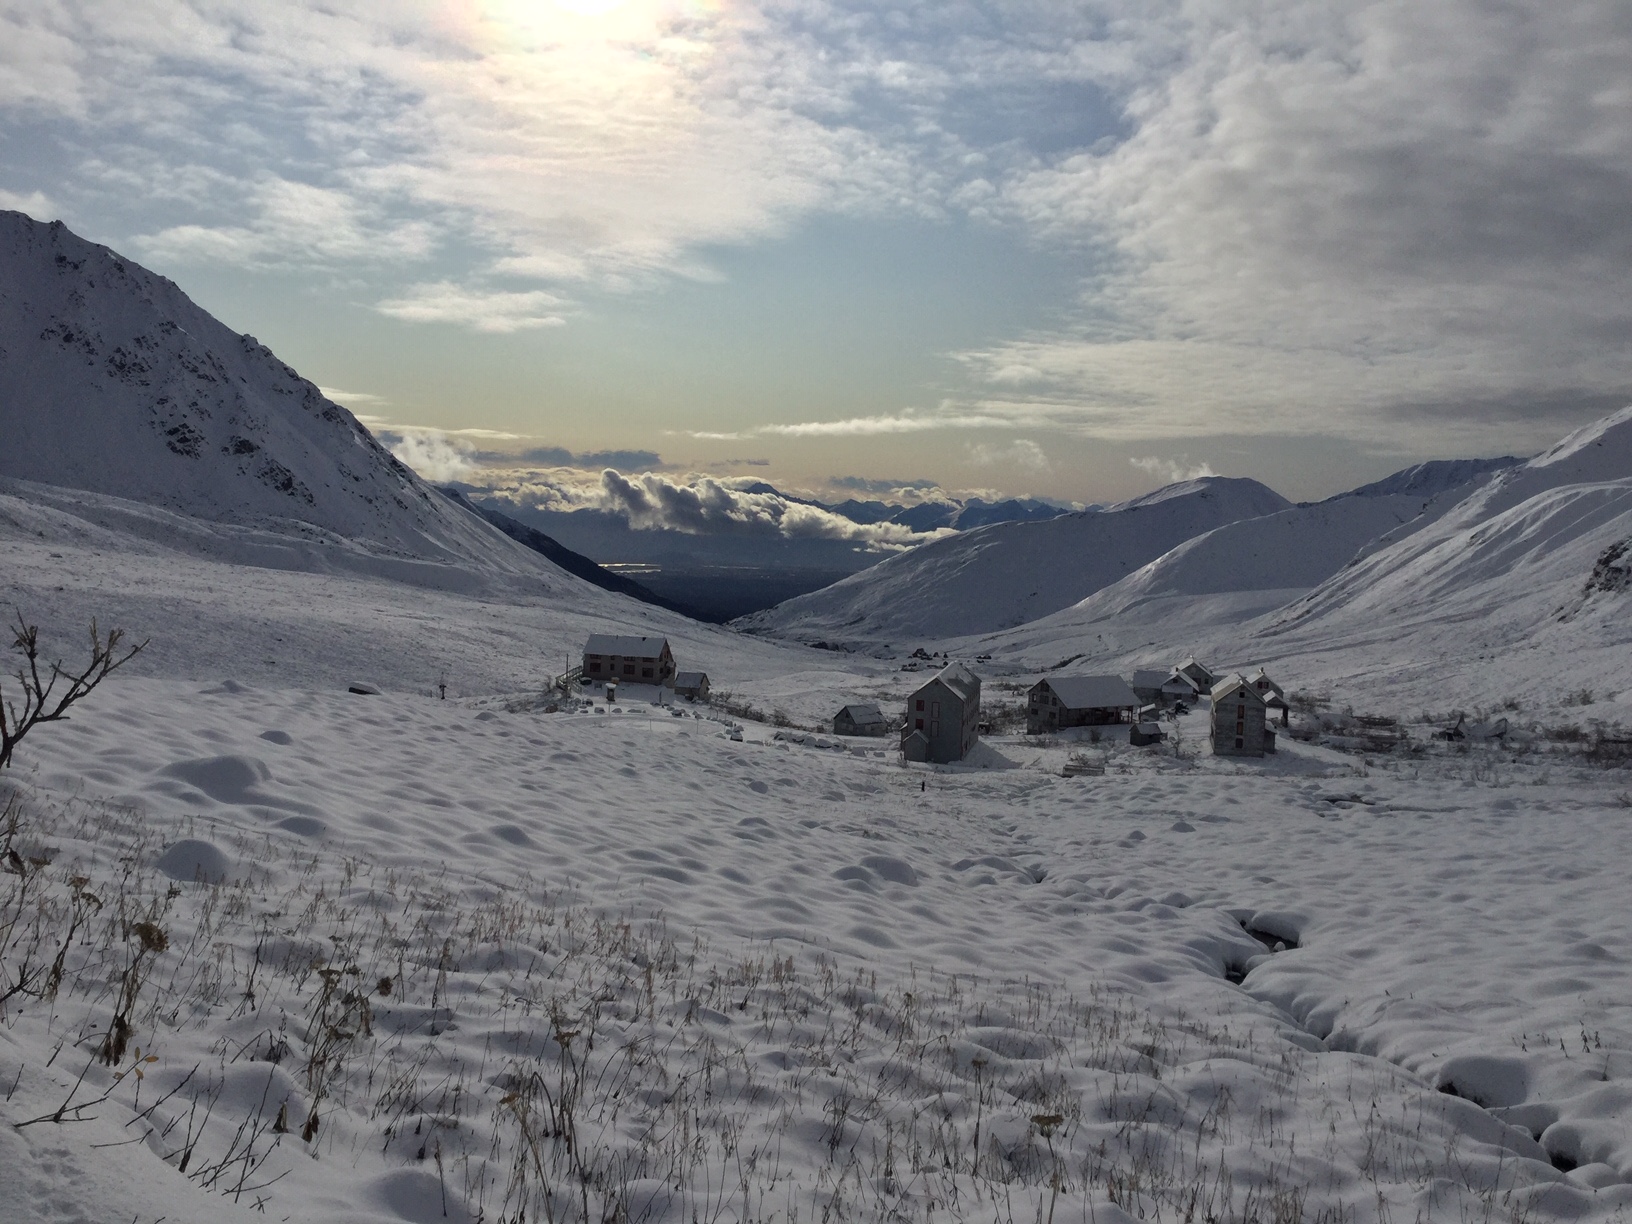 Early Season at Hatcher Pass: A Photo Essay